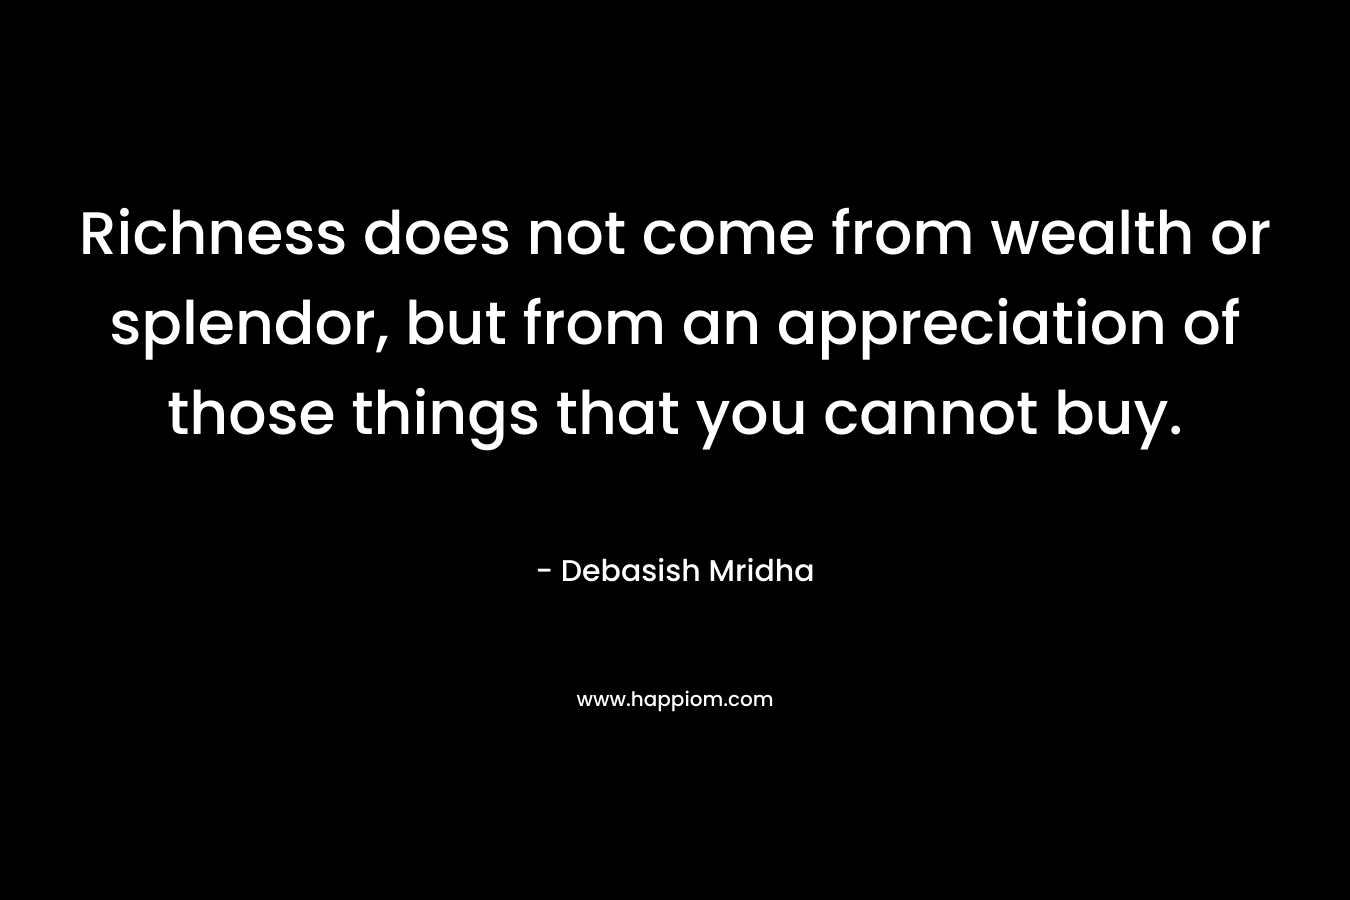 Richness does not come from wealth or splendor, but from an appreciation of those things that you cannot buy.